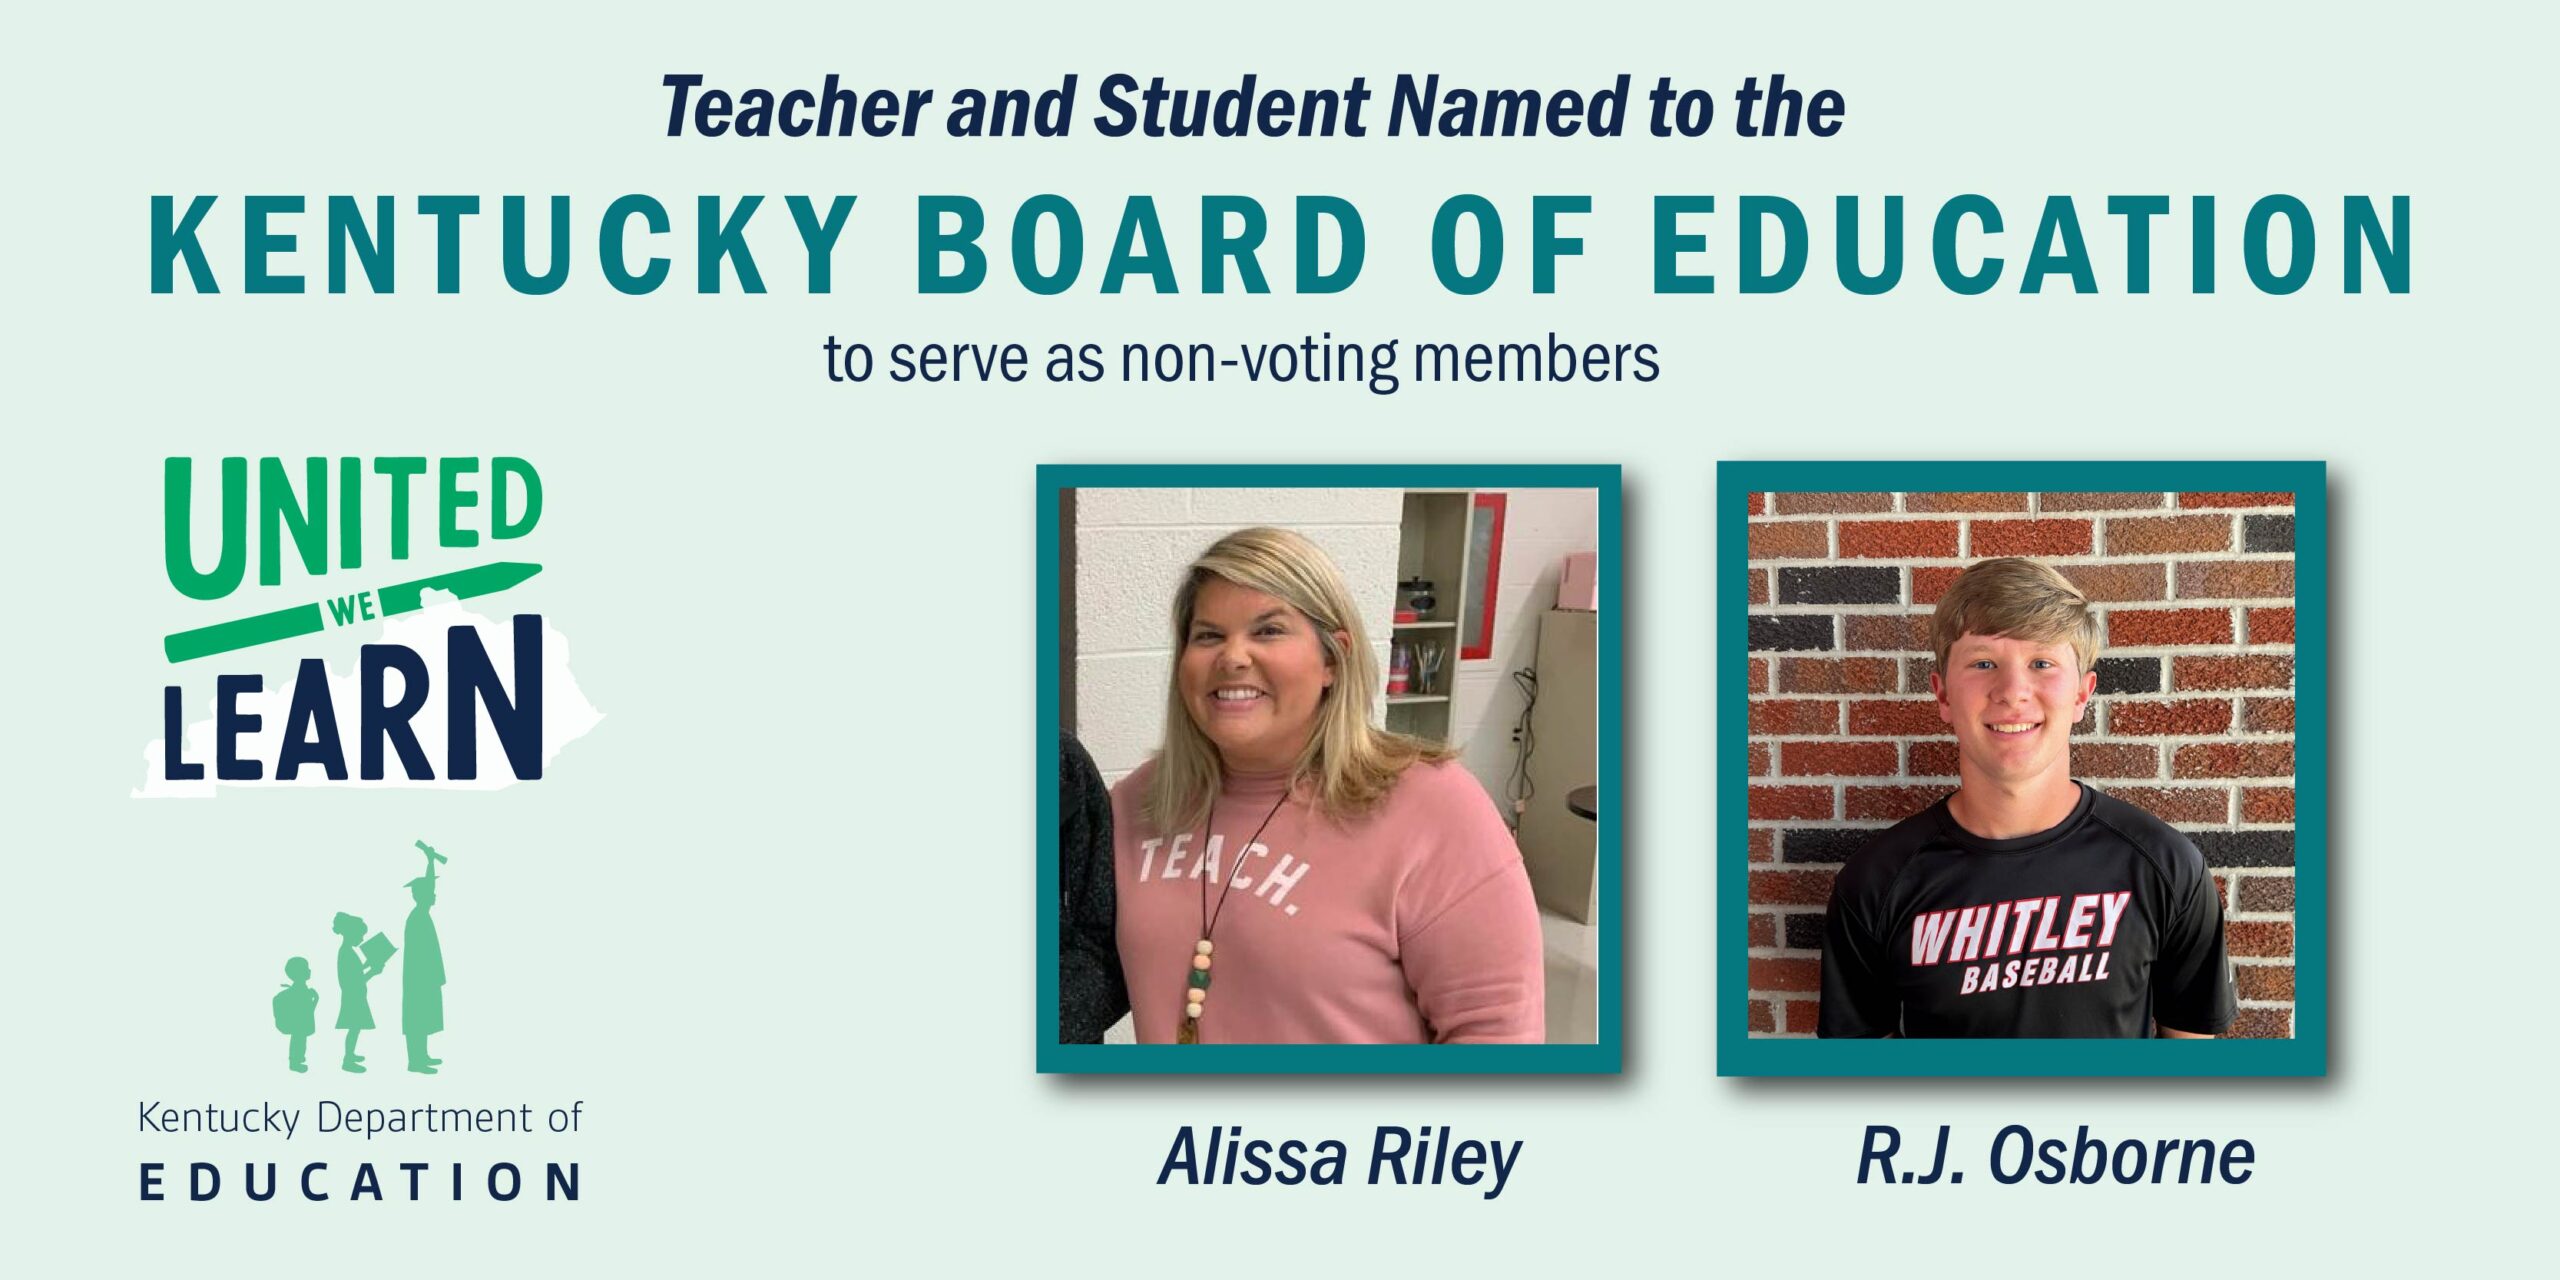 Graphic reads Teacher and Student named to the Kentucky Board of Education to serve as non-voting members. Included in the graphic is a photo of Alissa Riley, the new teacher representative, and R. J. Osborn, the new student representative.